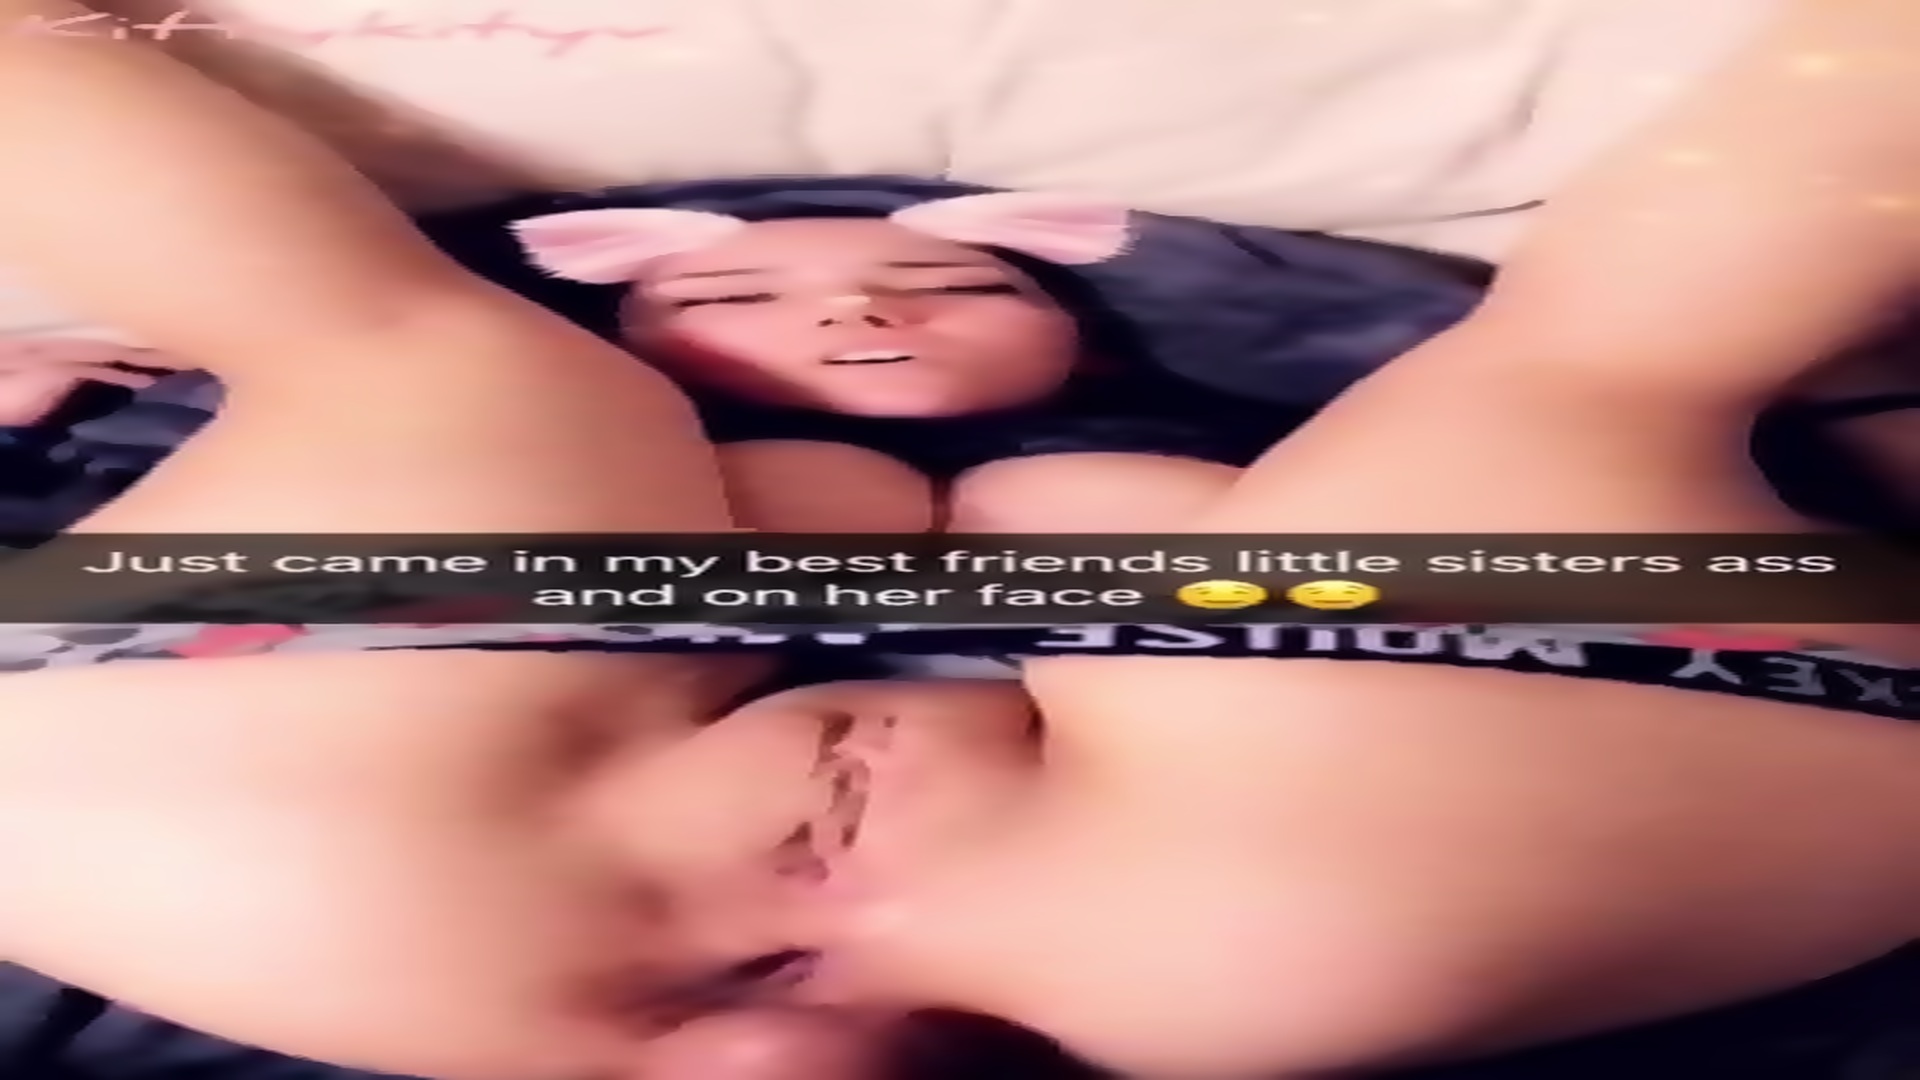 Lesbian Sisters Eating Pussy